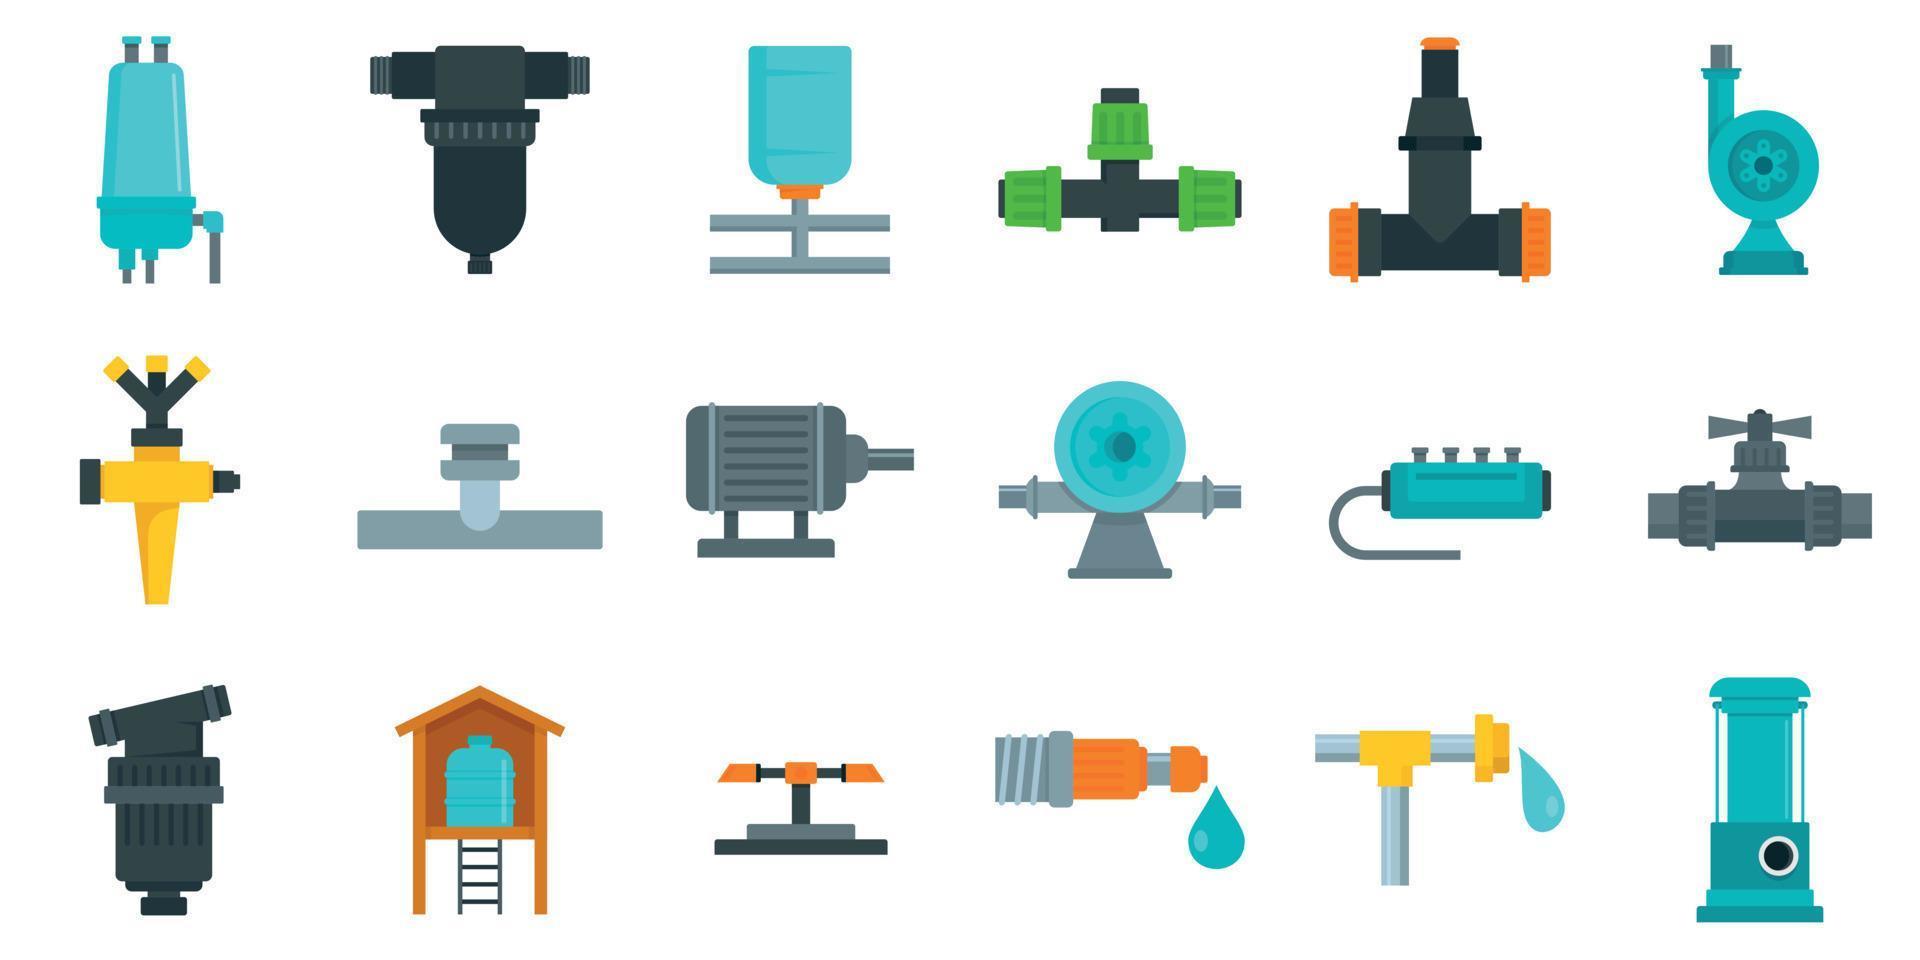 Irrigation system icon set, flat style vector